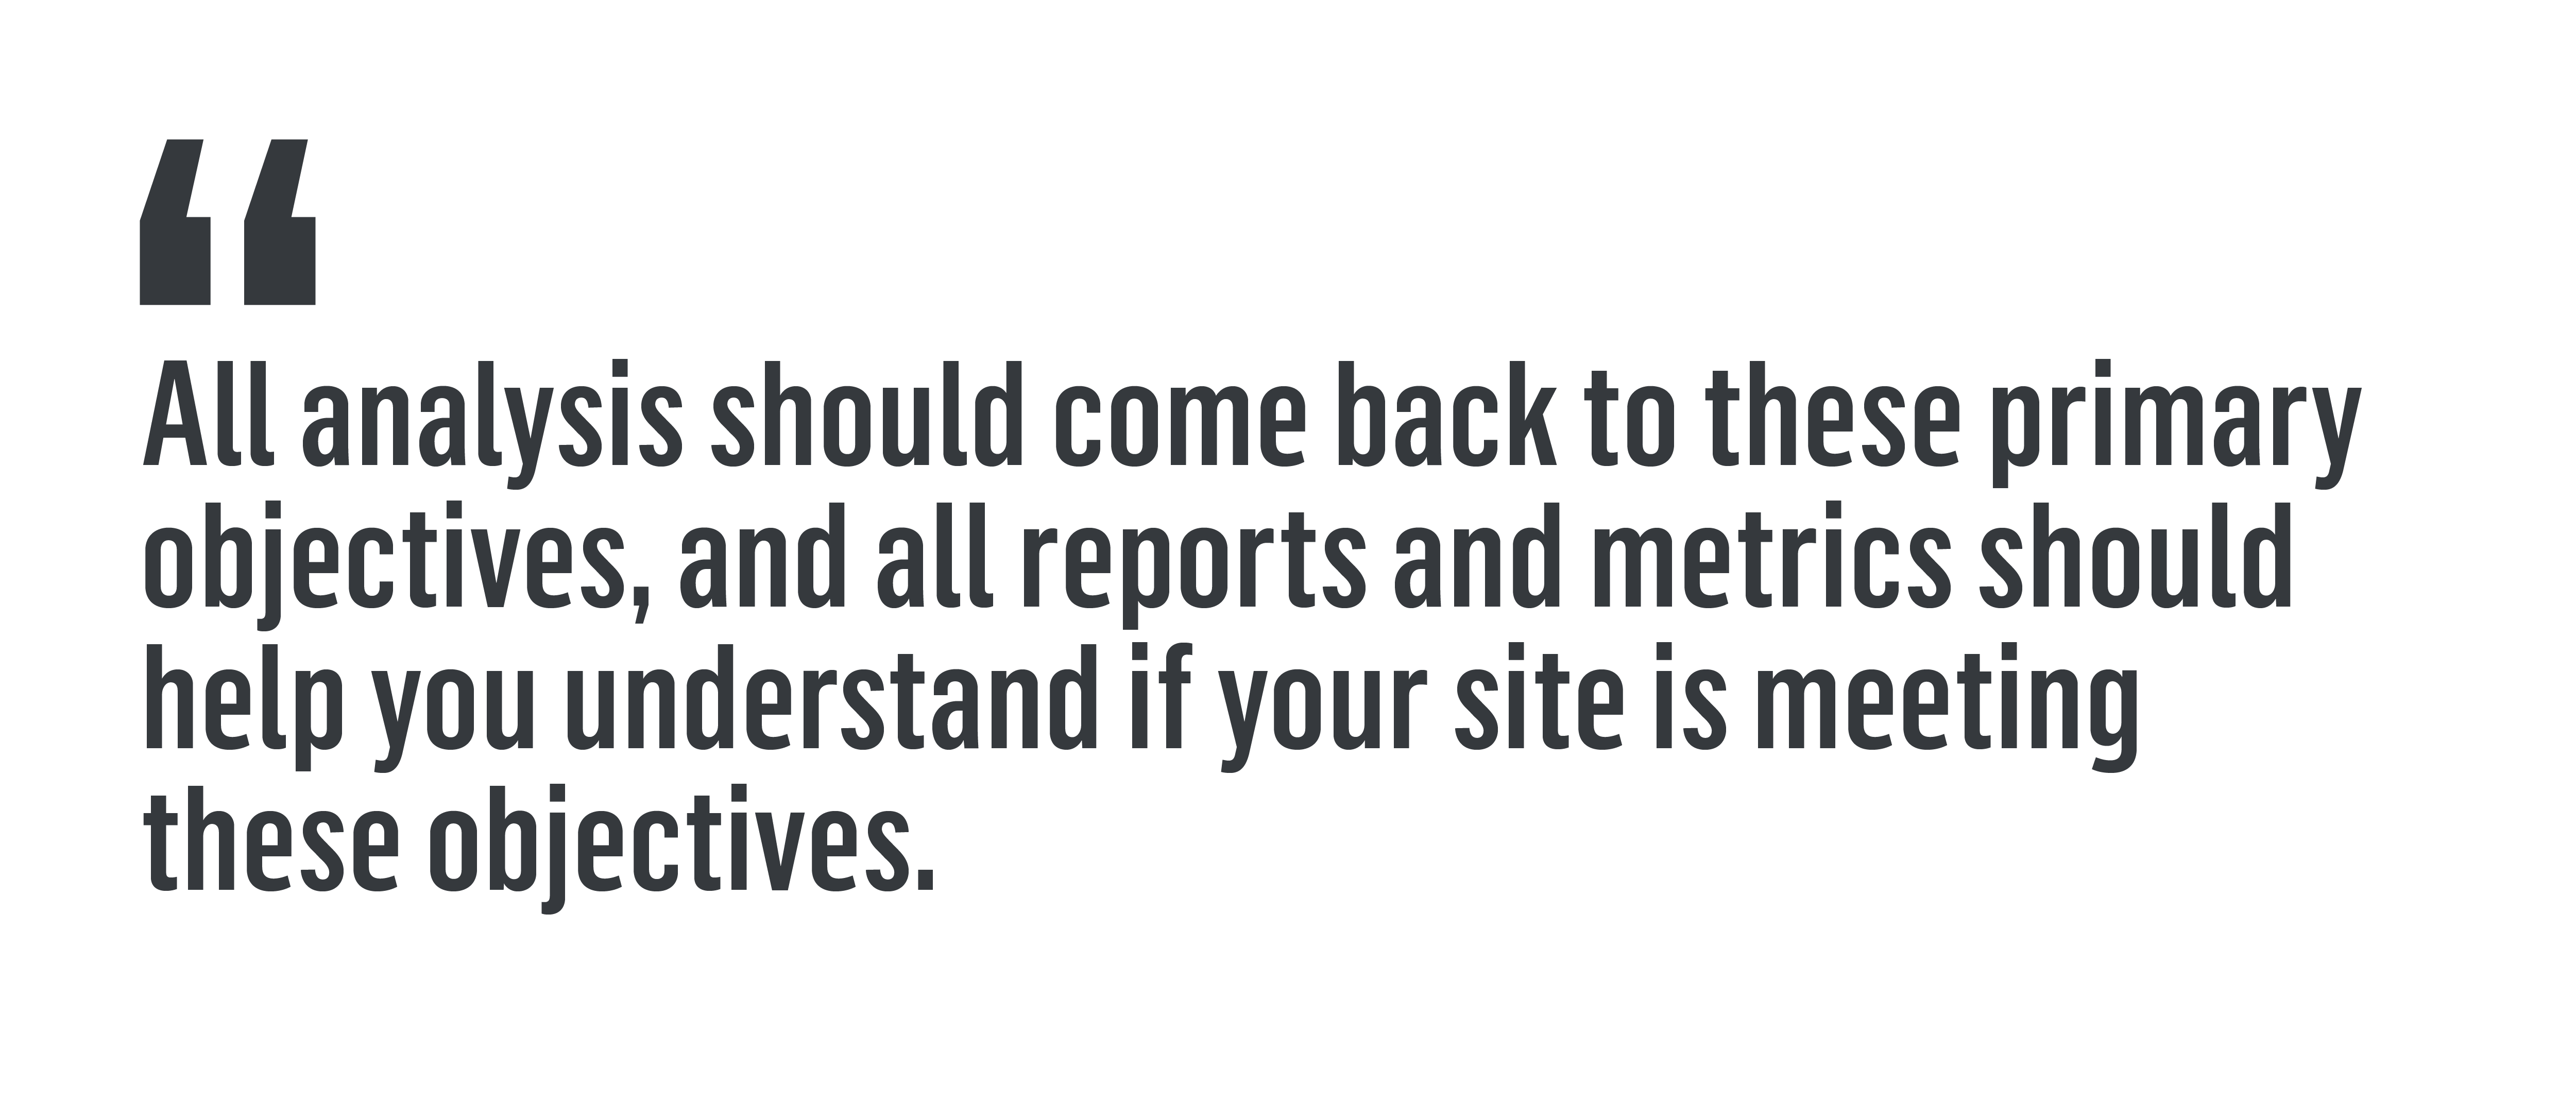 Quote that reads, "All analysis should come back to these primary objectives, and all reports and metrics should help you understand if your site is meeting these objectives."